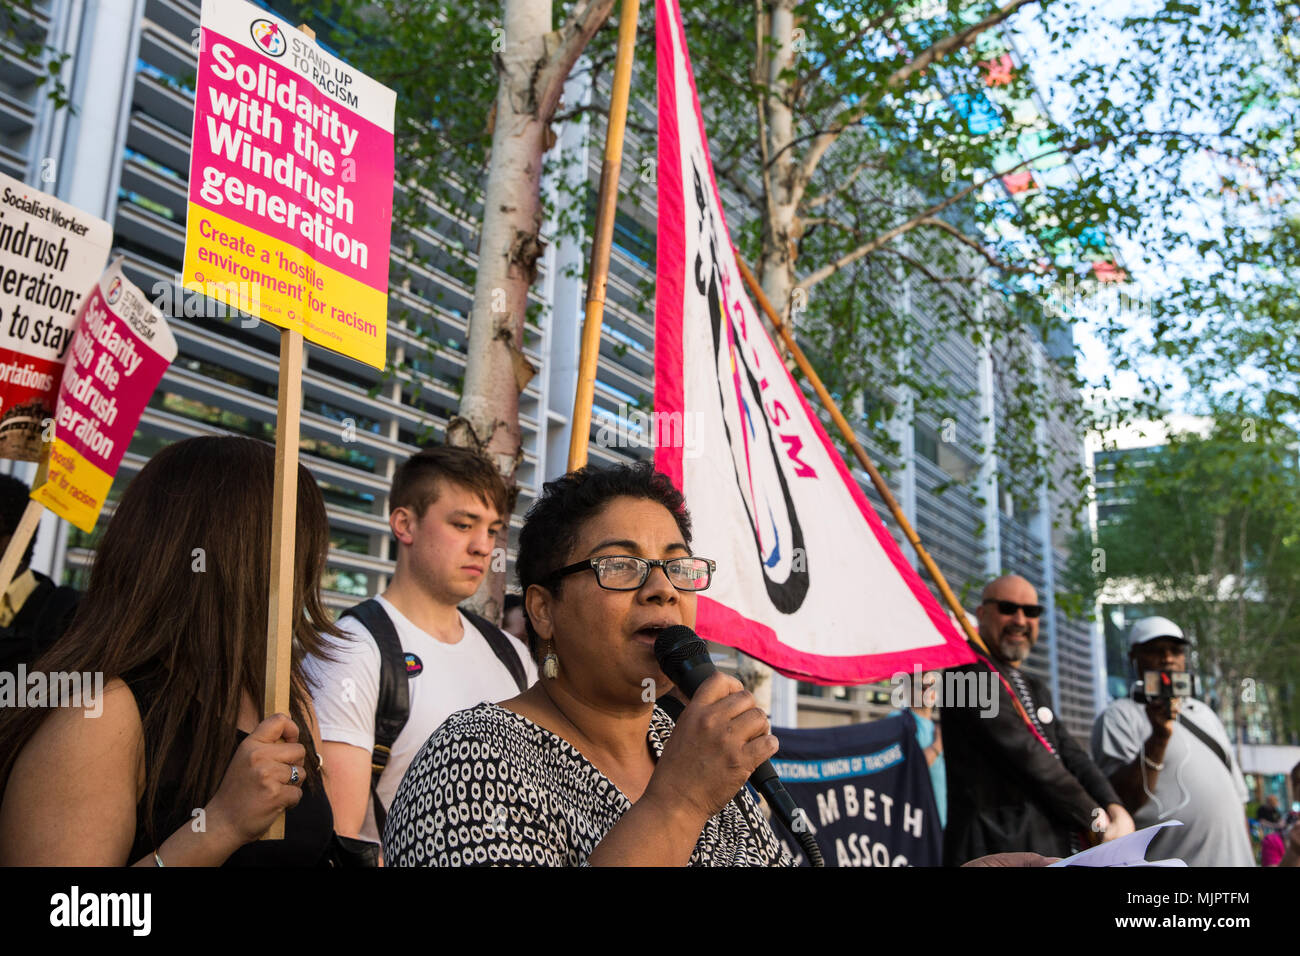 London, UK. 5th May, 2018. An immigration lawyer reads her poem about Windrush to activists from Stand Up To Racism and supporters of the Windrush generation protesting outside the Home Office to call for the scrapping of the 2014 Immigration Act. Credit: Mark Kerrison/Alamy Live News Stock Photo